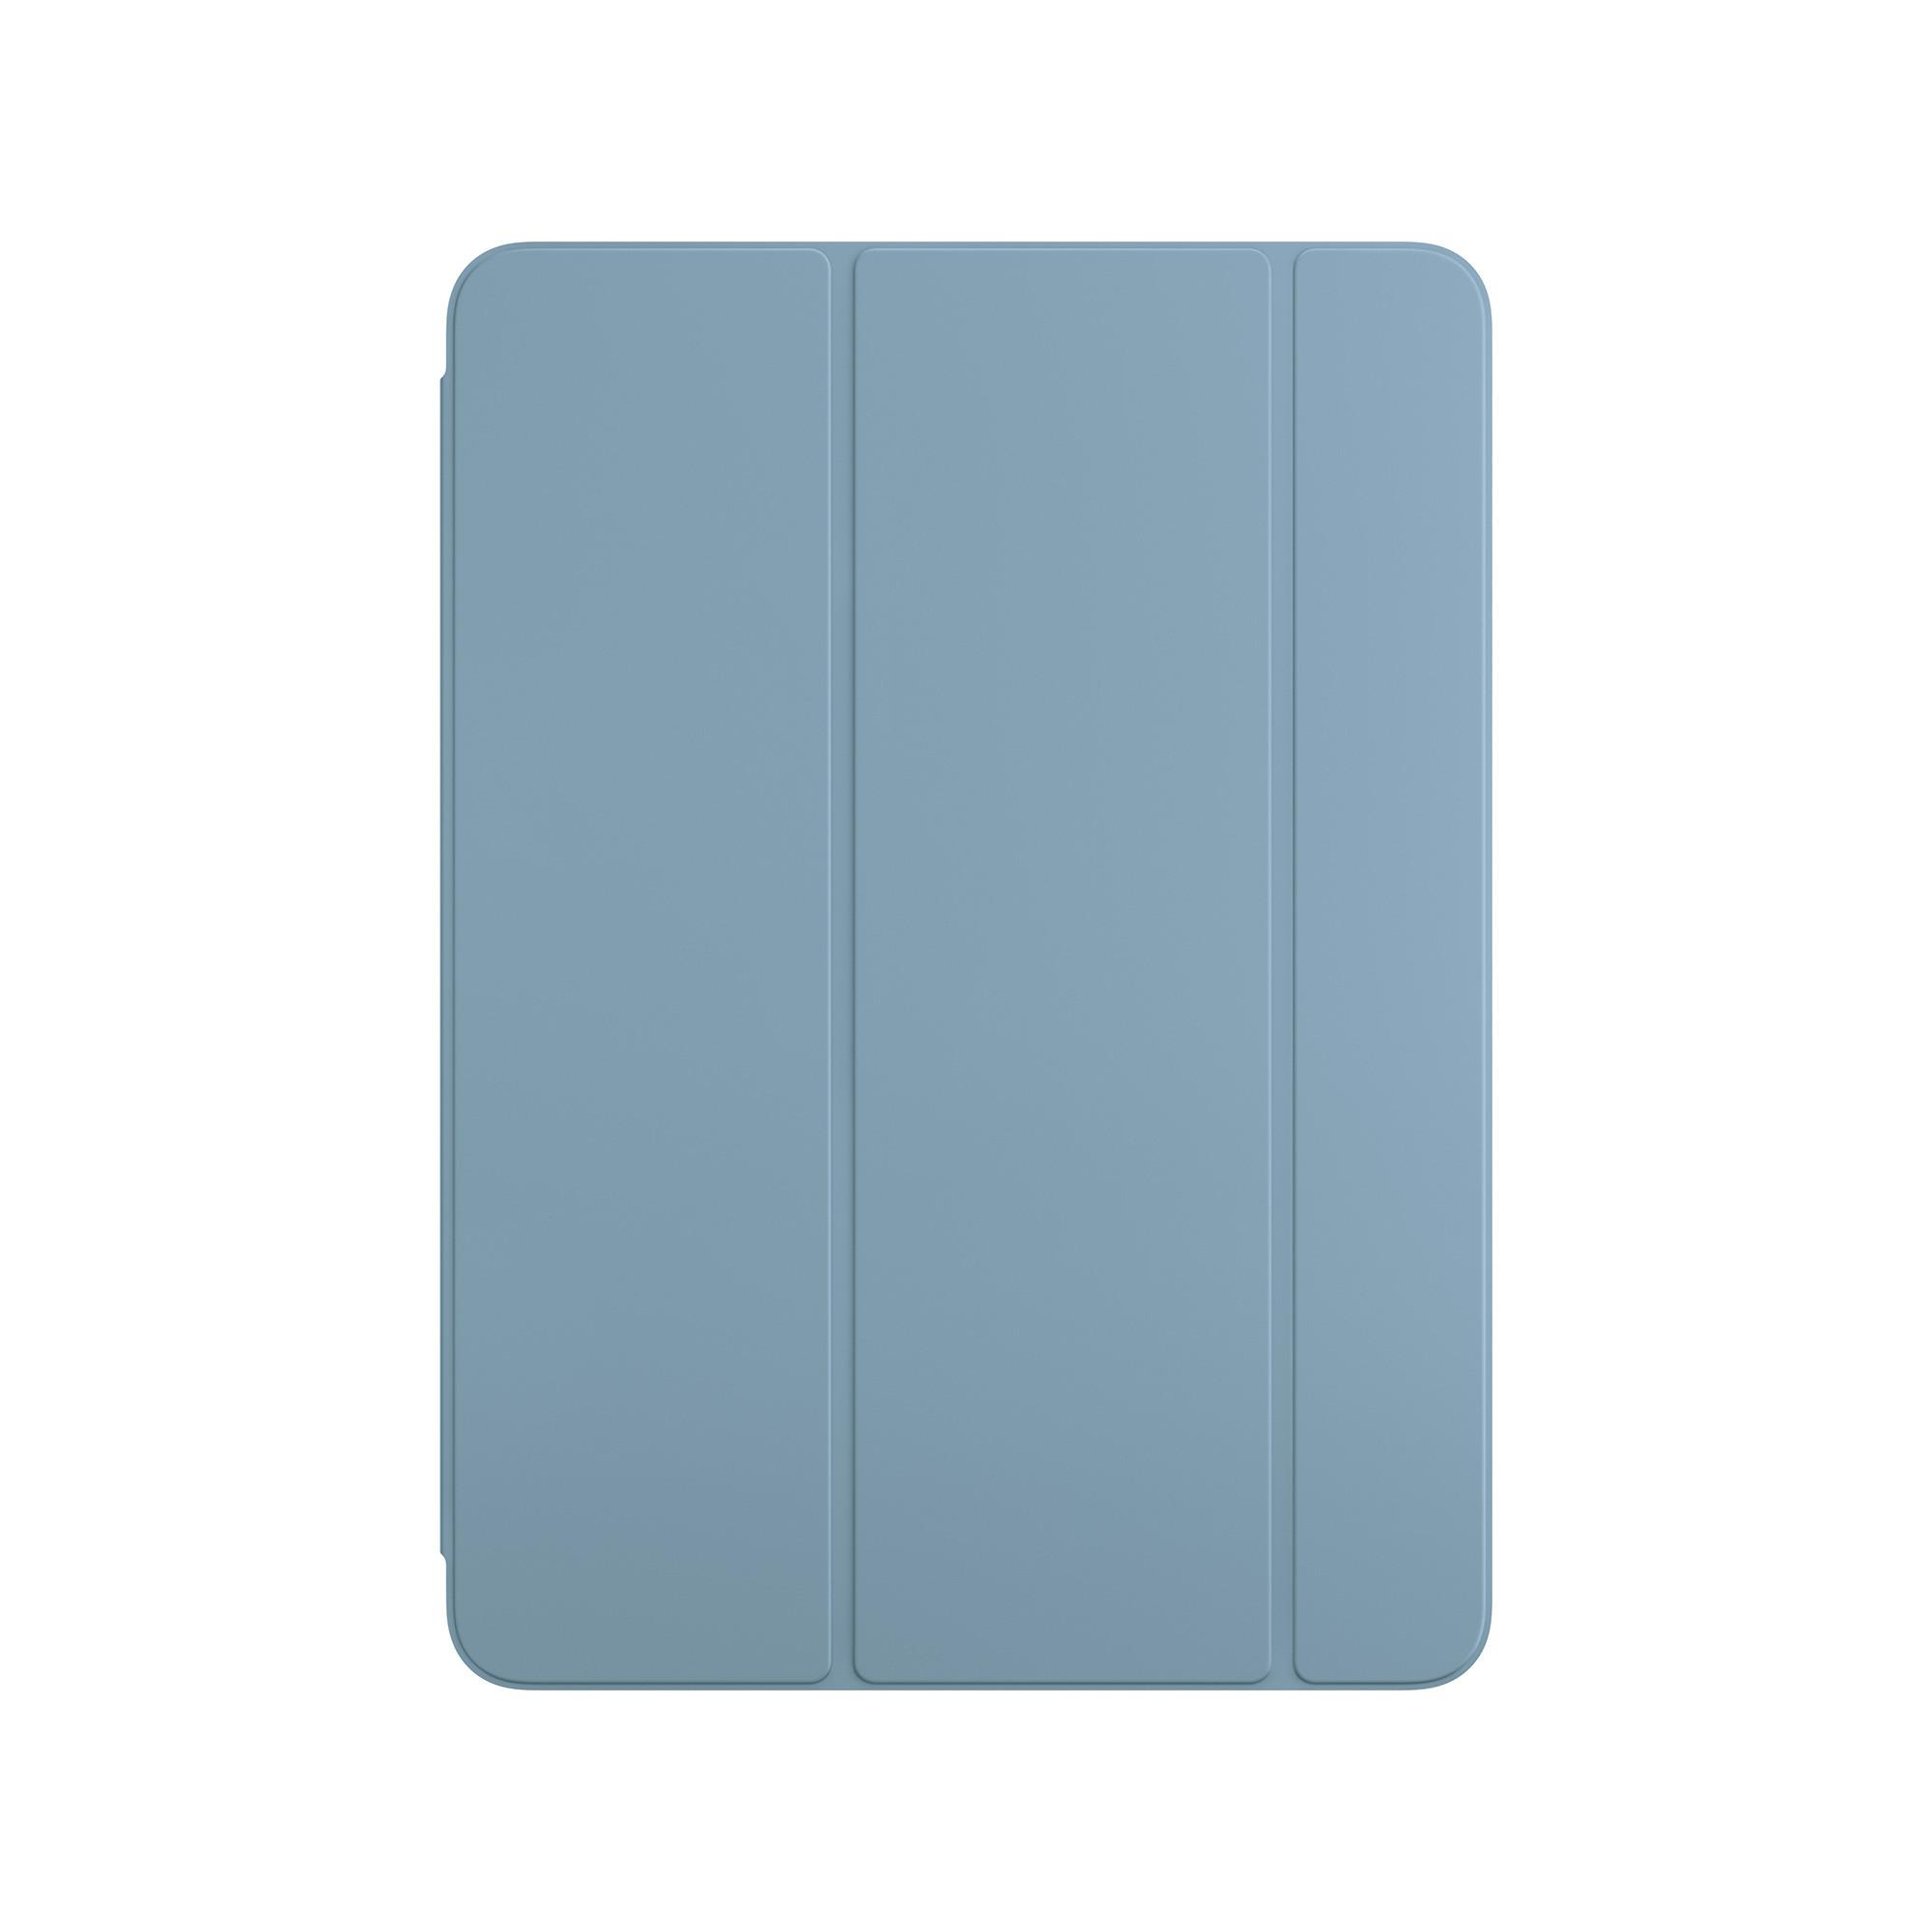 Apple Smart Folio for iPad Air 11-inch (M2) Tablet Hülle 